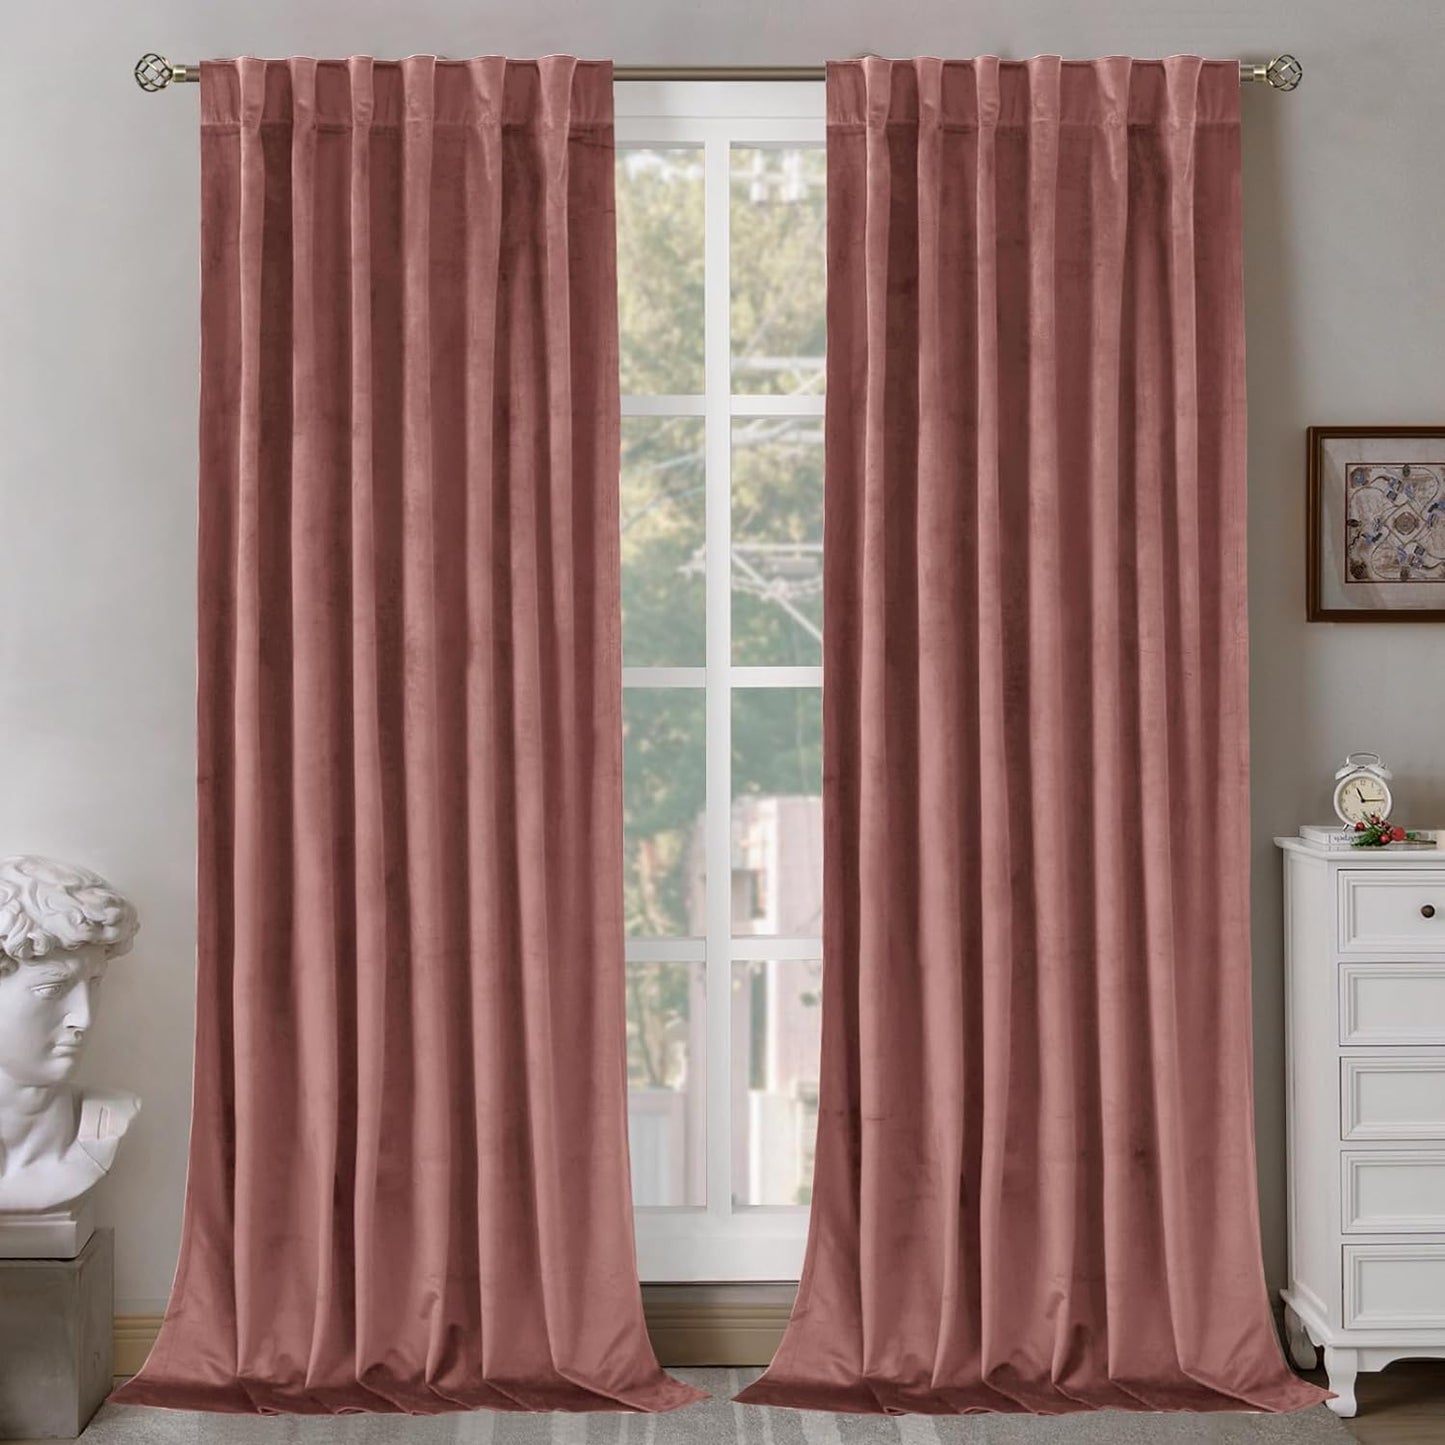 Bgment Grey Velvet Curtains 108 Inches Long for Living Room, Thermal Insulated Room Darkening Curtains Drapes Window Treatment with Back Tab and Rod Pocket, Set of 2 Panels, 52 X 108 Inch  BGment Dusty Rose 52W X 120L 